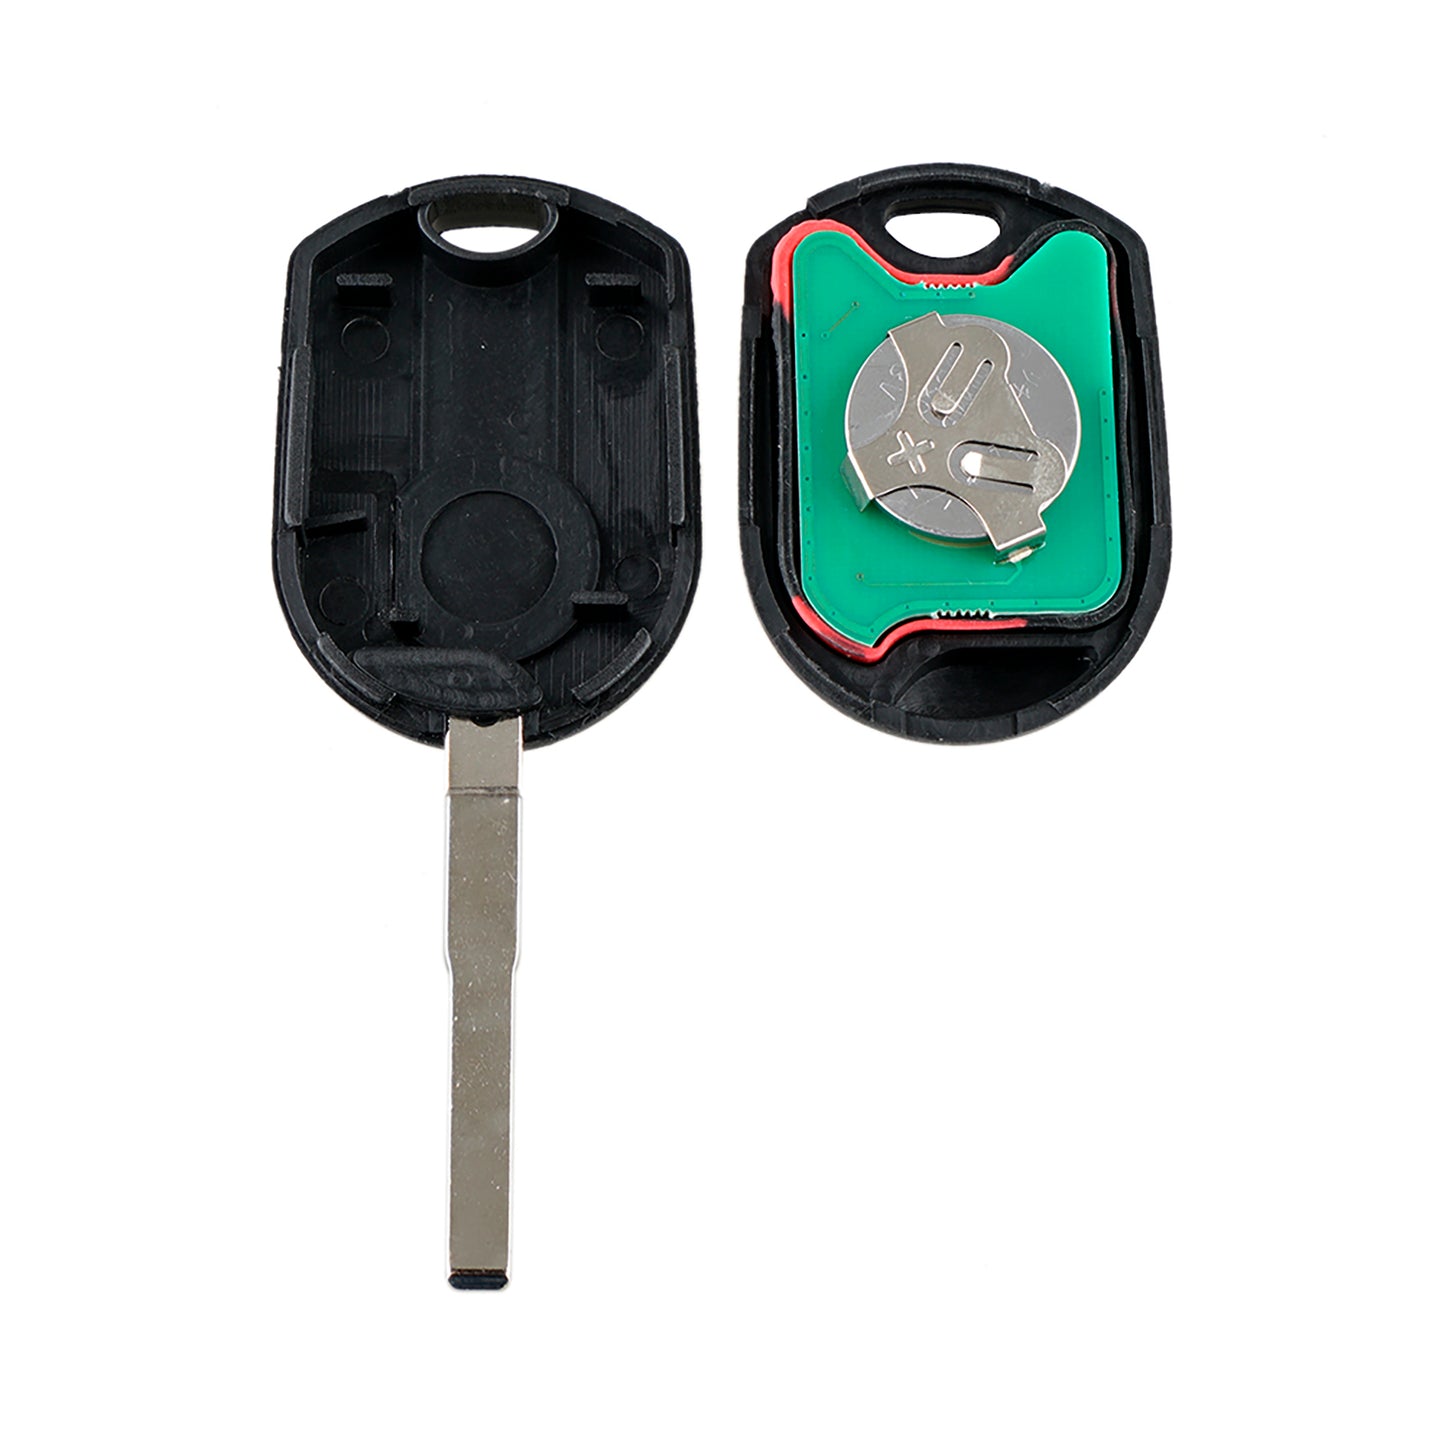 3 Buttons 315MHz Keyless Entry Fob Remote Car Key For 2012-2019 Ford Focus C-Max Escape Transit Connect F350 Fiesta FCC ID:  OUCD6000022 SKU : J746